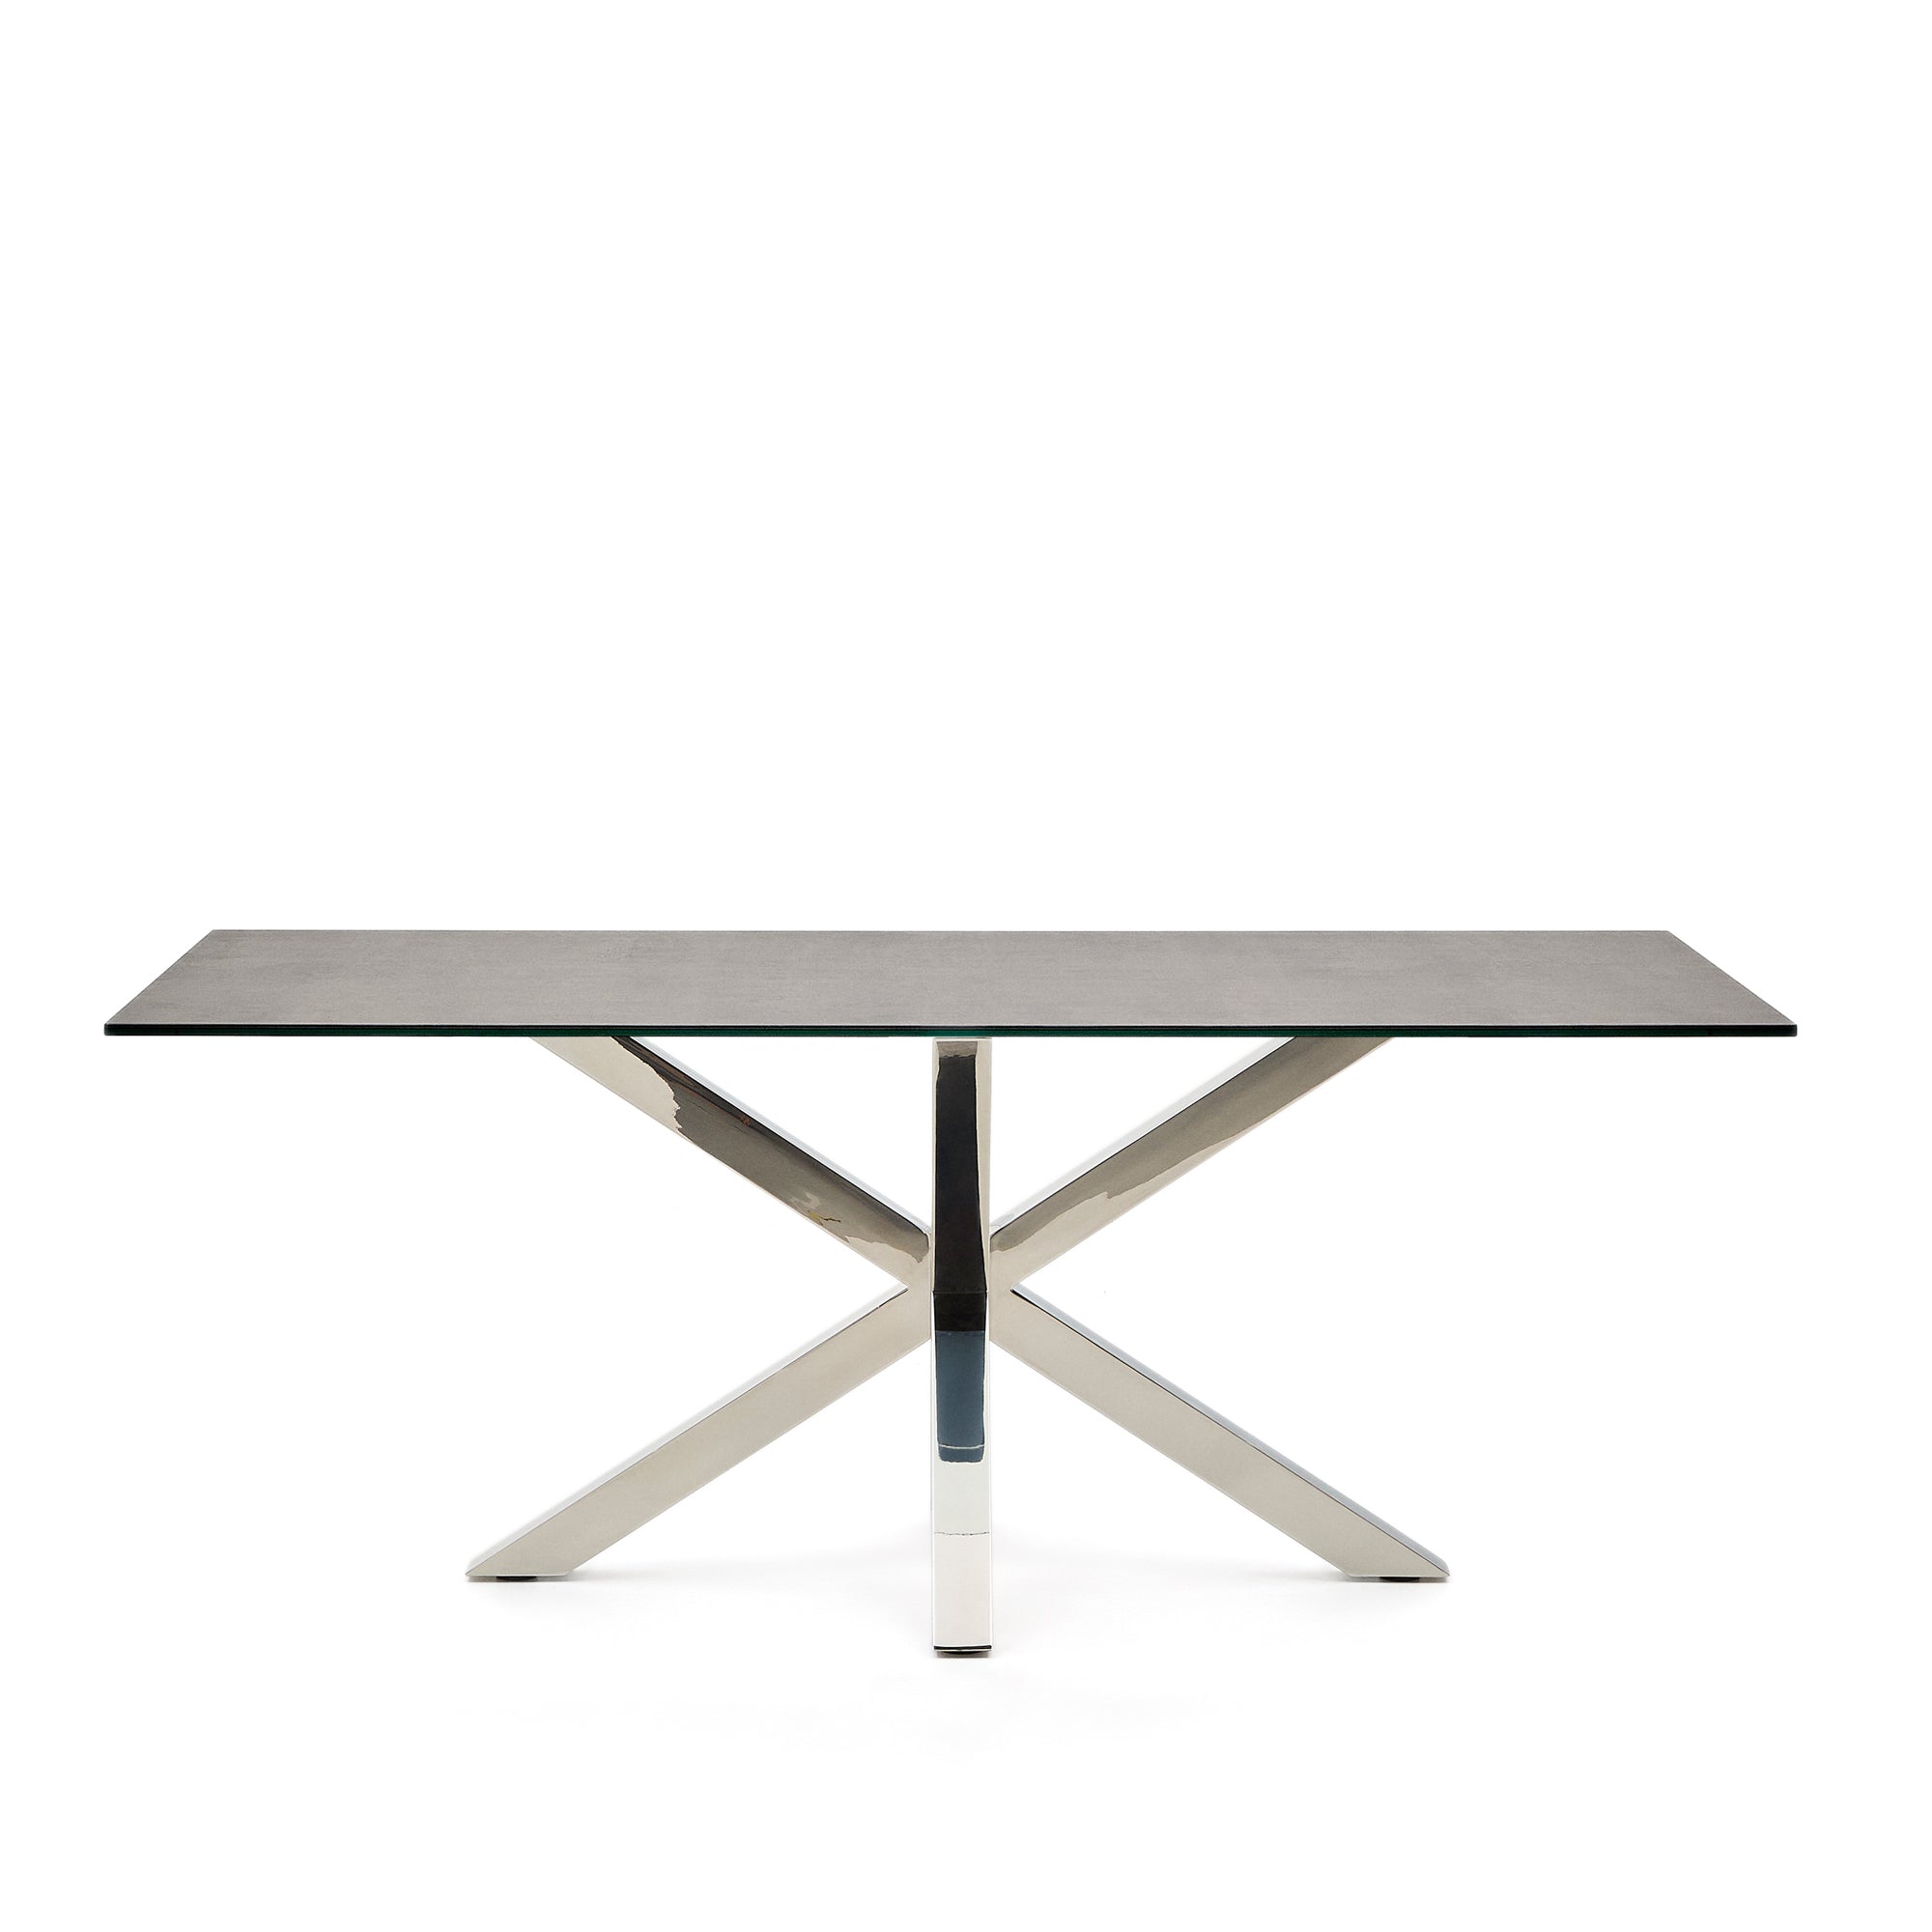 Argo table 200x100, Stainless Steel Porcelain Iron Moss